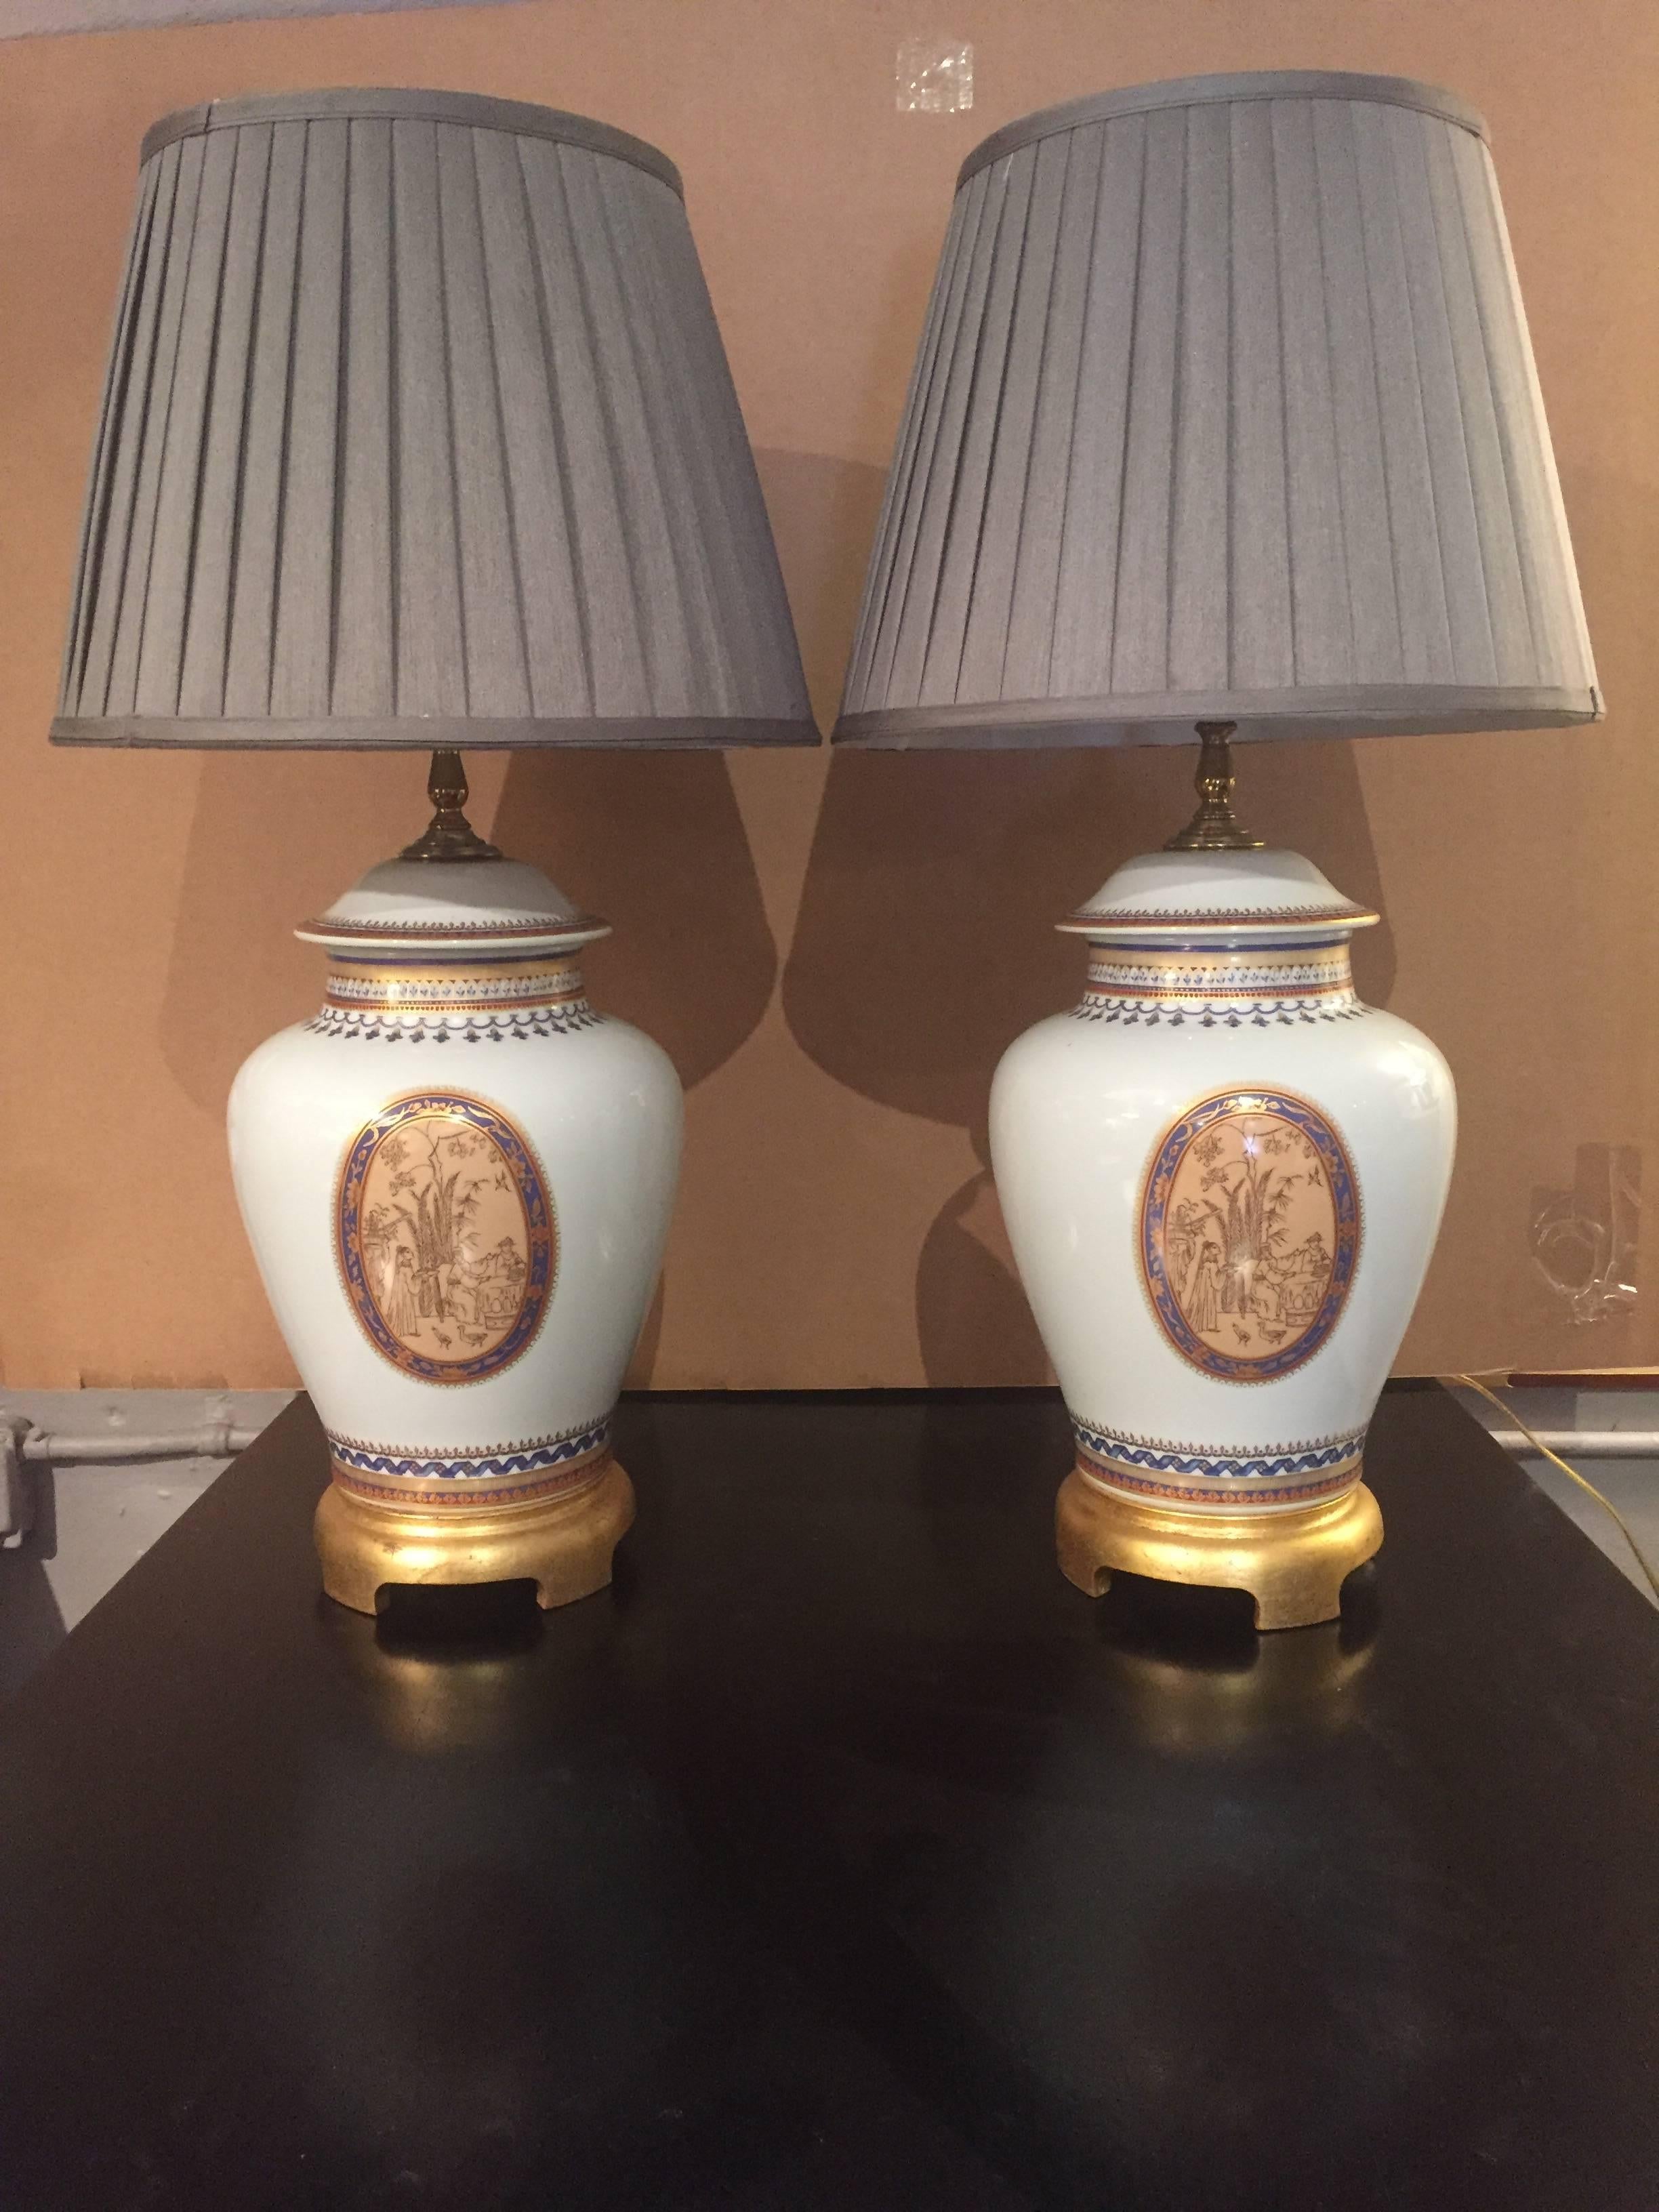 Two ginger jar shaped white porcelain regal table lamps having blue and gold decoration with oval medallions and gilded bases. Custom shades.
Height to socket 22